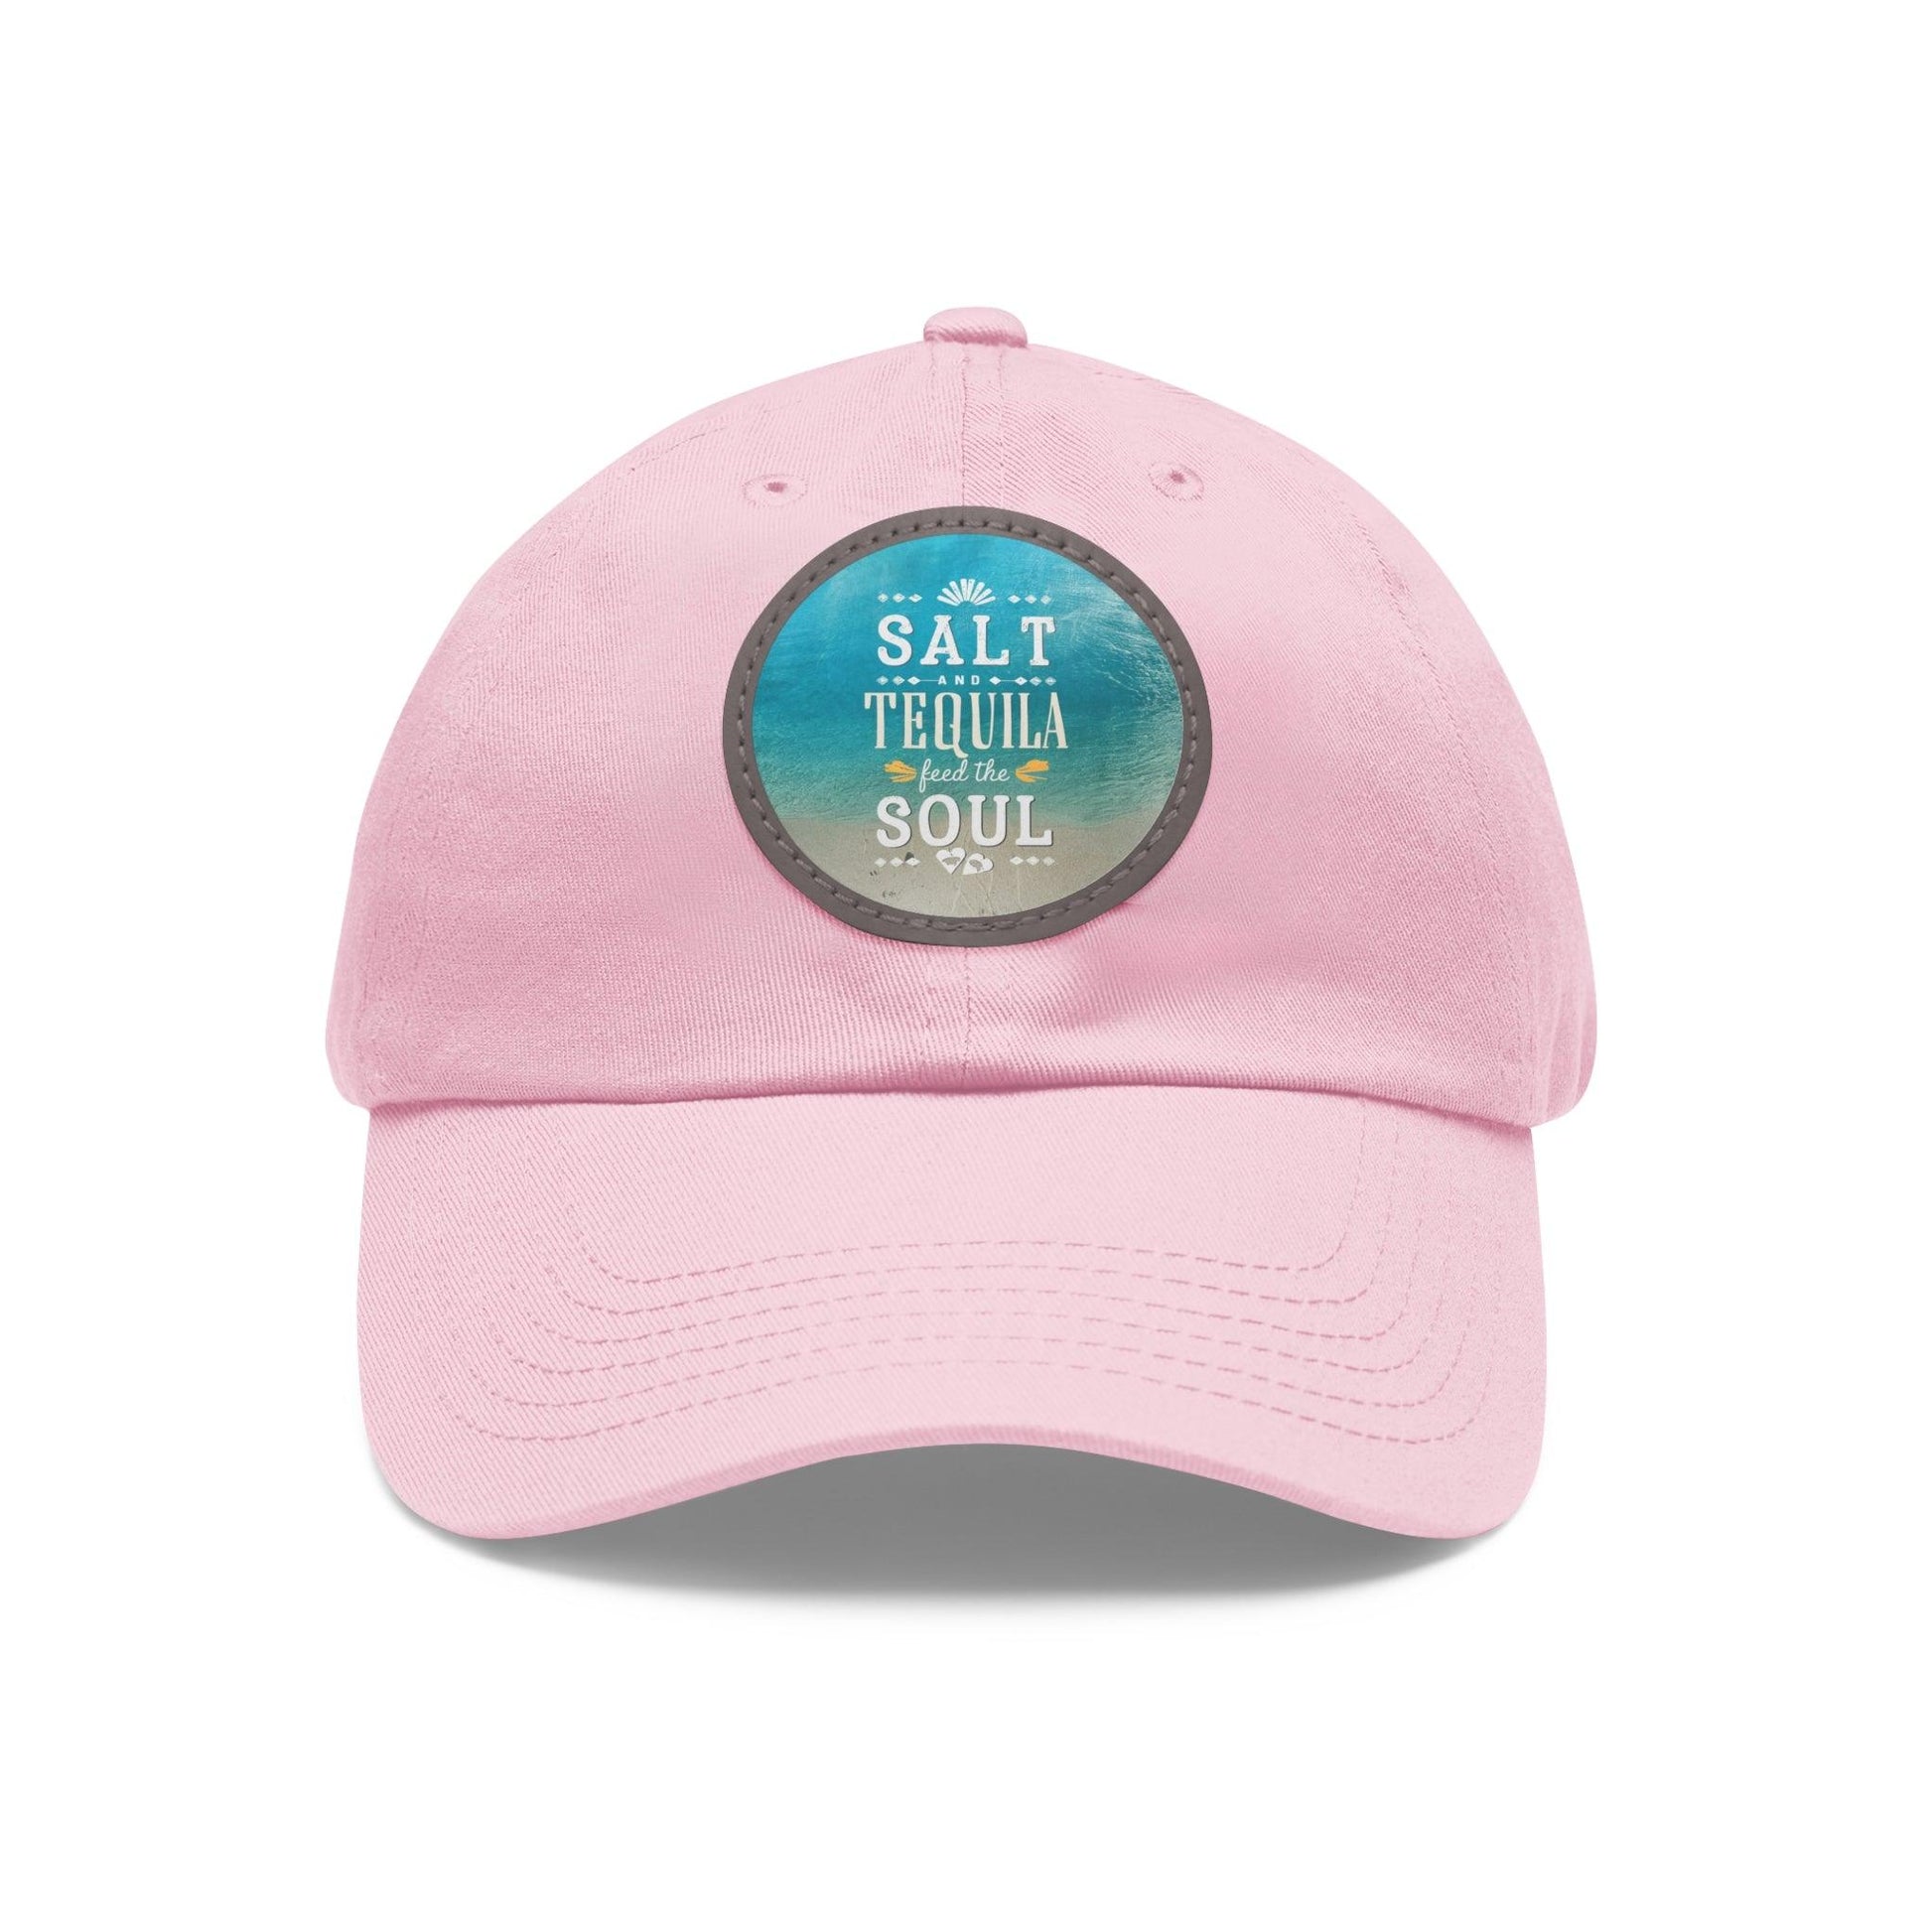 Salt and Tequila Feed the Soul Cap, Beach Hair Day Hat - Coastal Collections